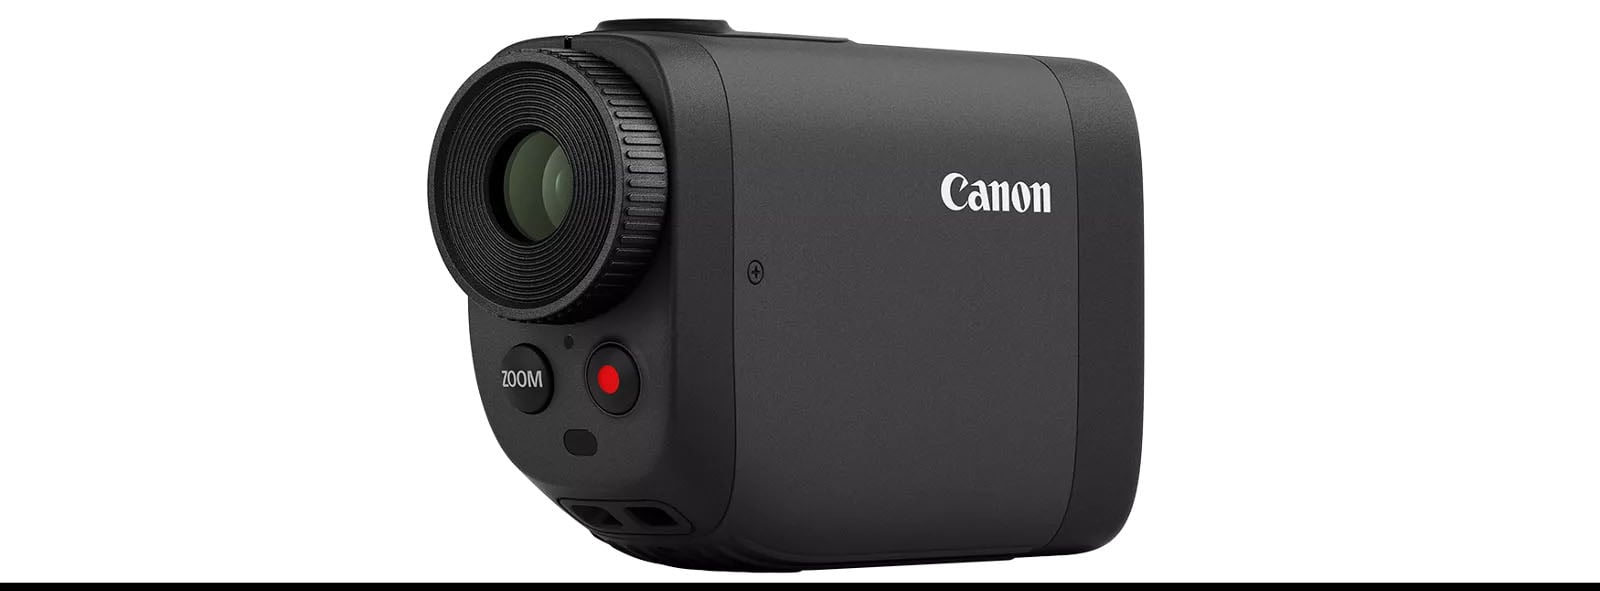 A compact black Canon camera with a prominent lens on the left side. The camera features a zoom button and a red recording button on the front. Canon's logo is printed on the side. The background is plain white.